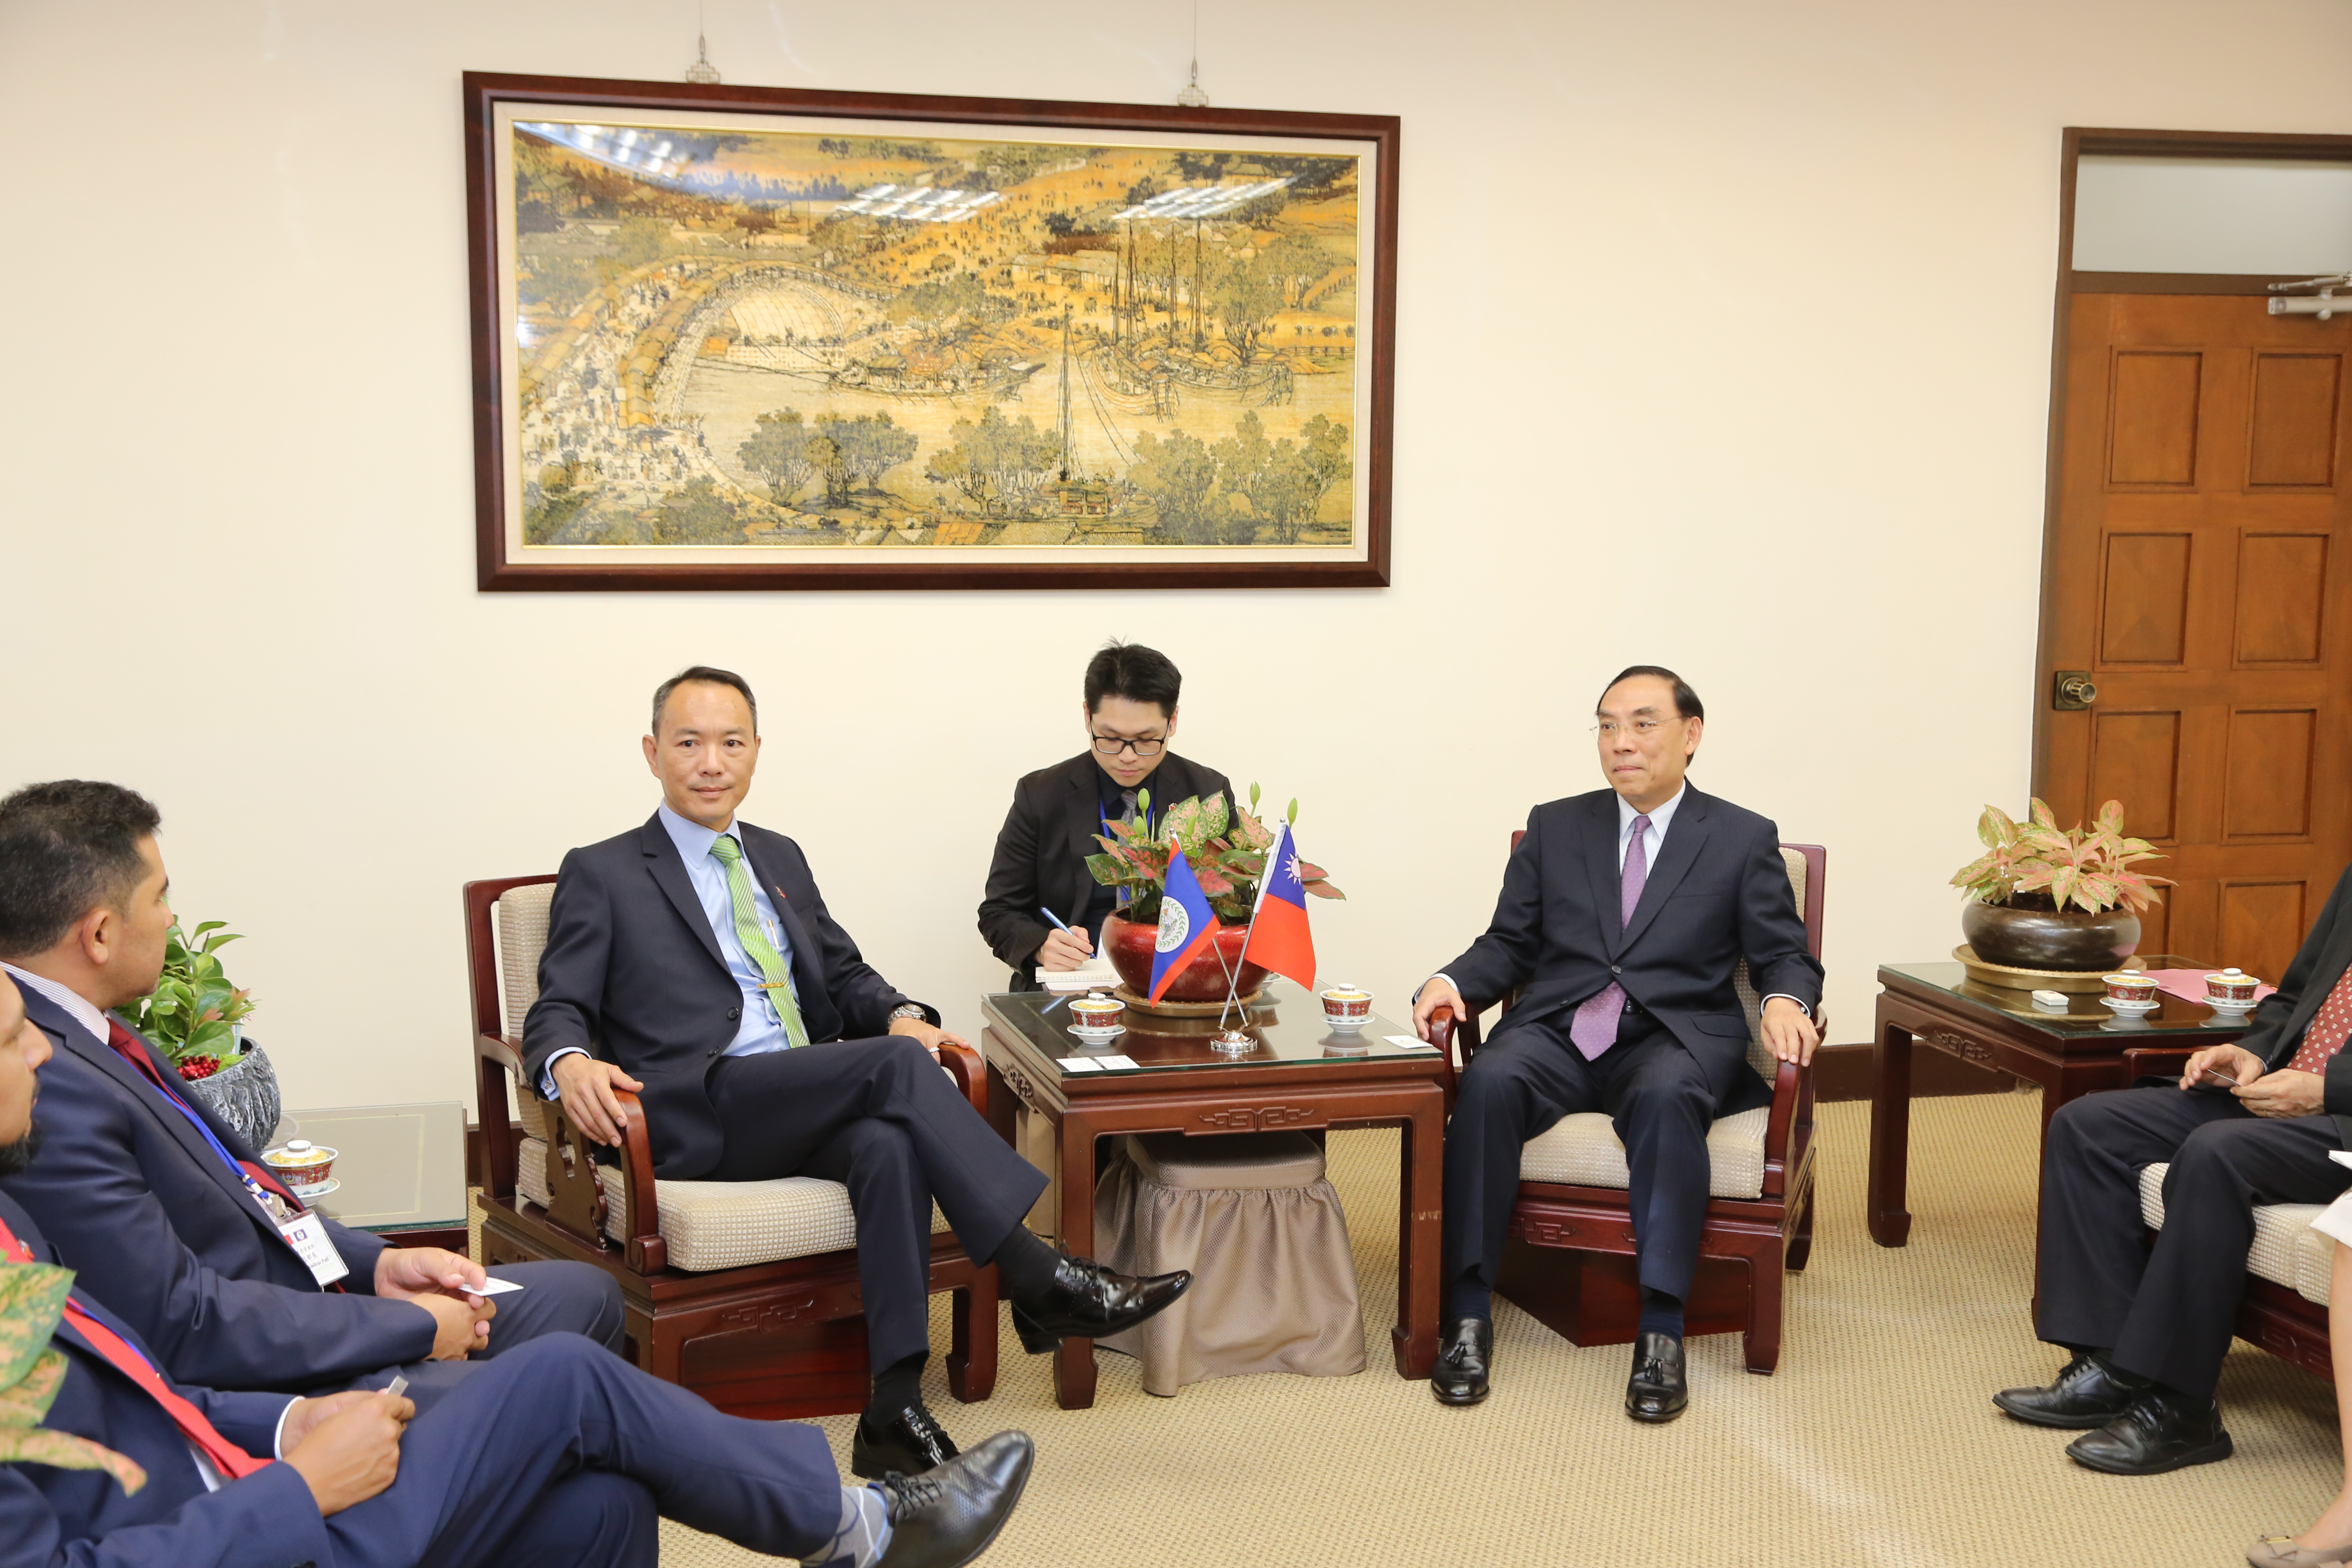 Visit from a delegation led by Hon. Lee Mark Chang, President of the Senate, National Assembly of Belize on April 23, 2019